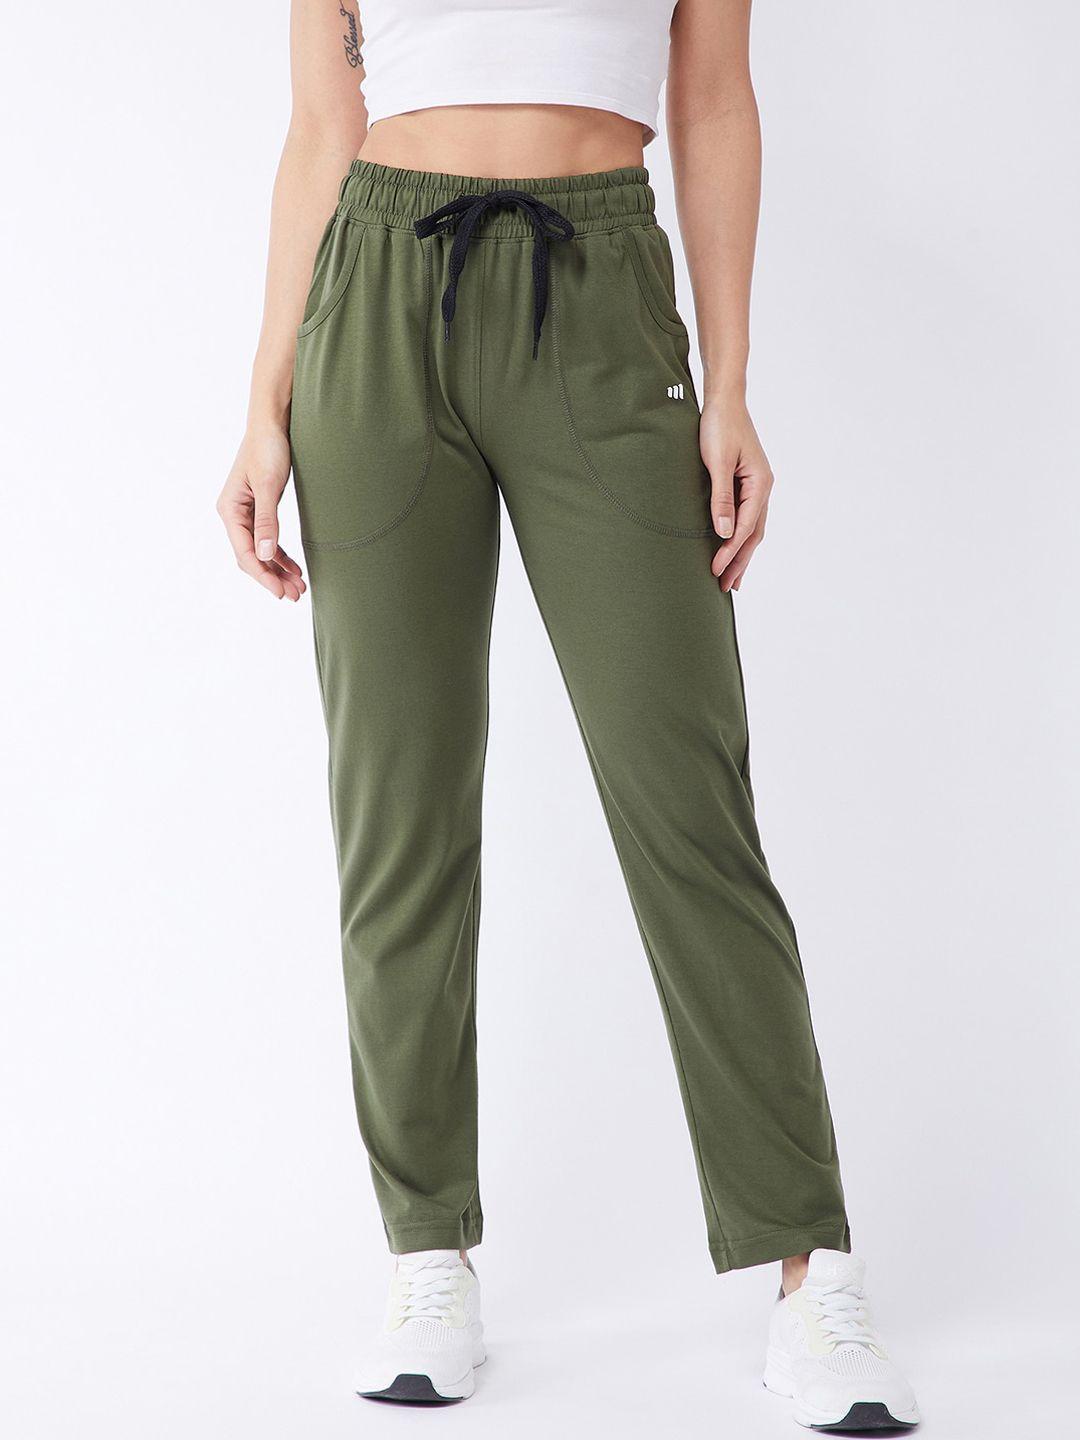 modeve-women-olive-green-solid-cotton-track-pants